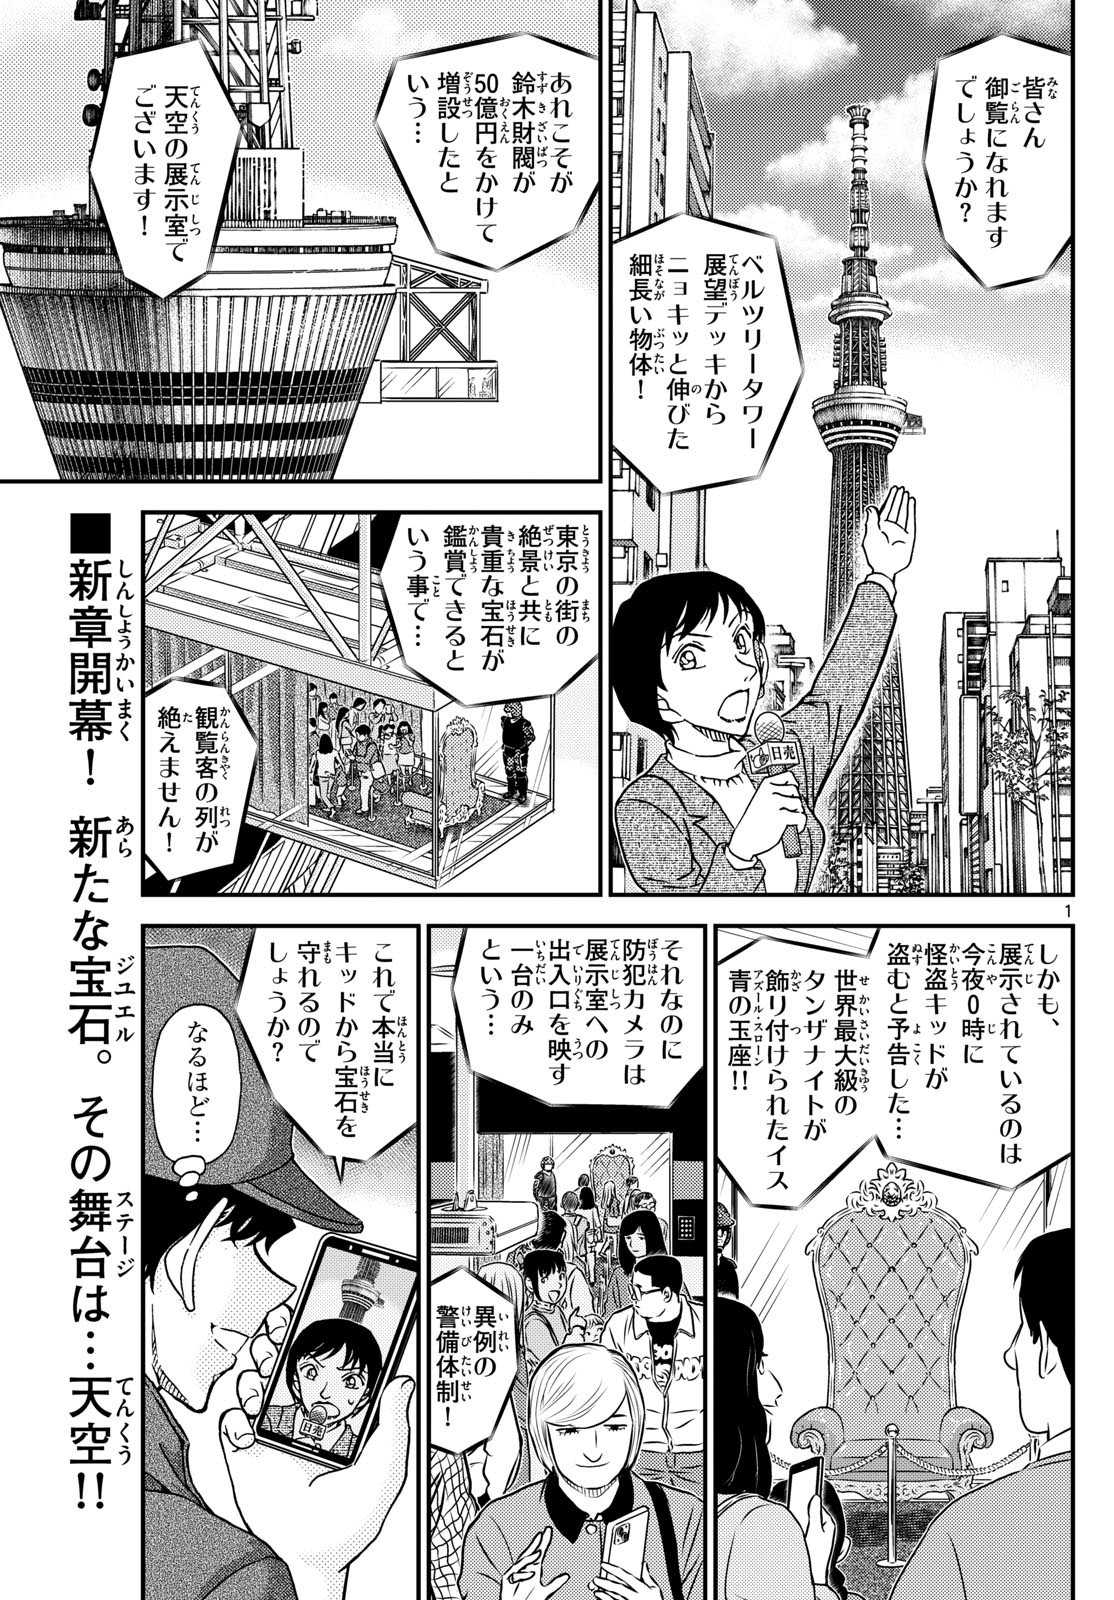 Detective Conan - Chapter 1119 - Page 1